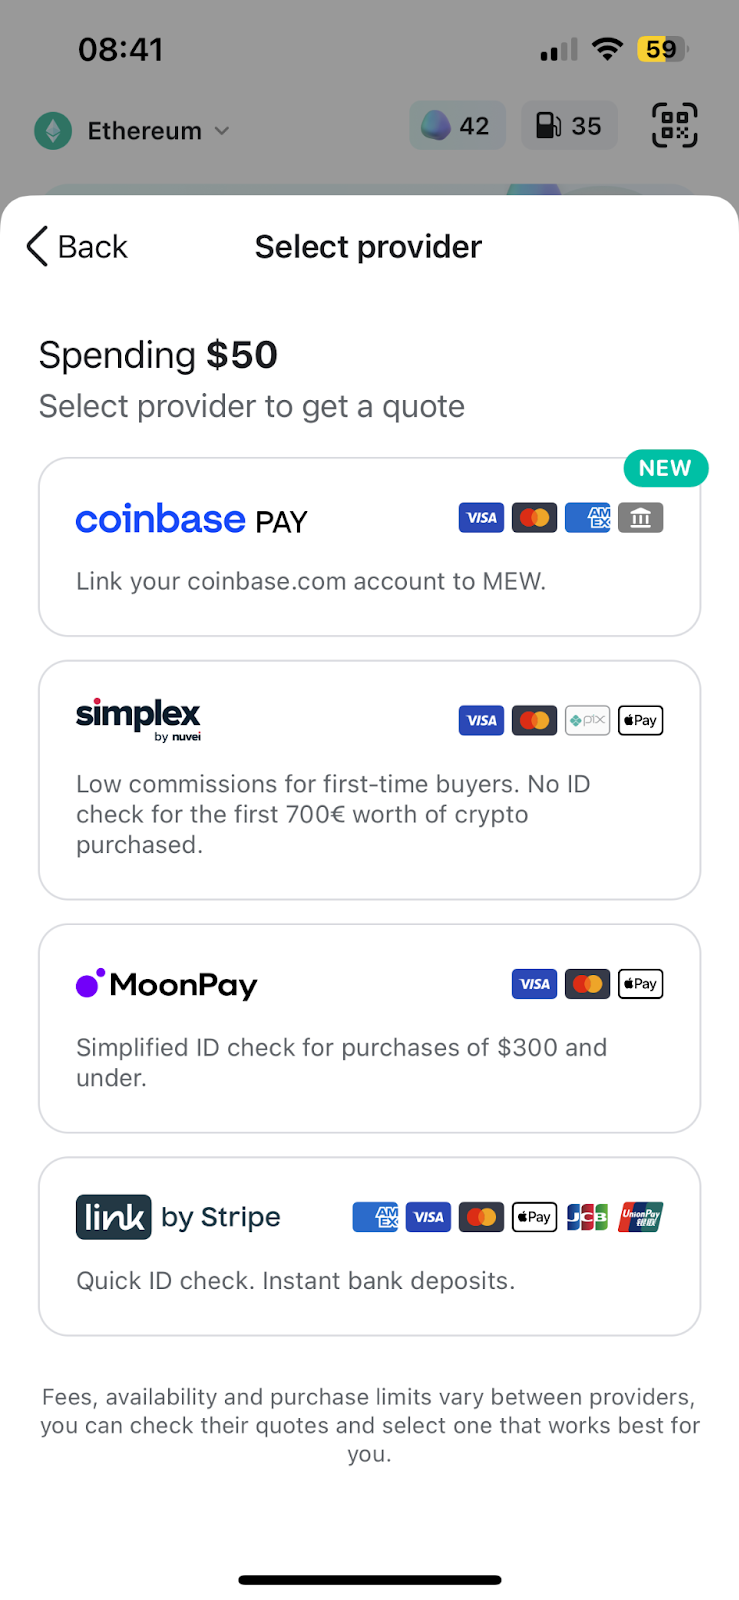 Onboard to MEW with Coinbase Pay